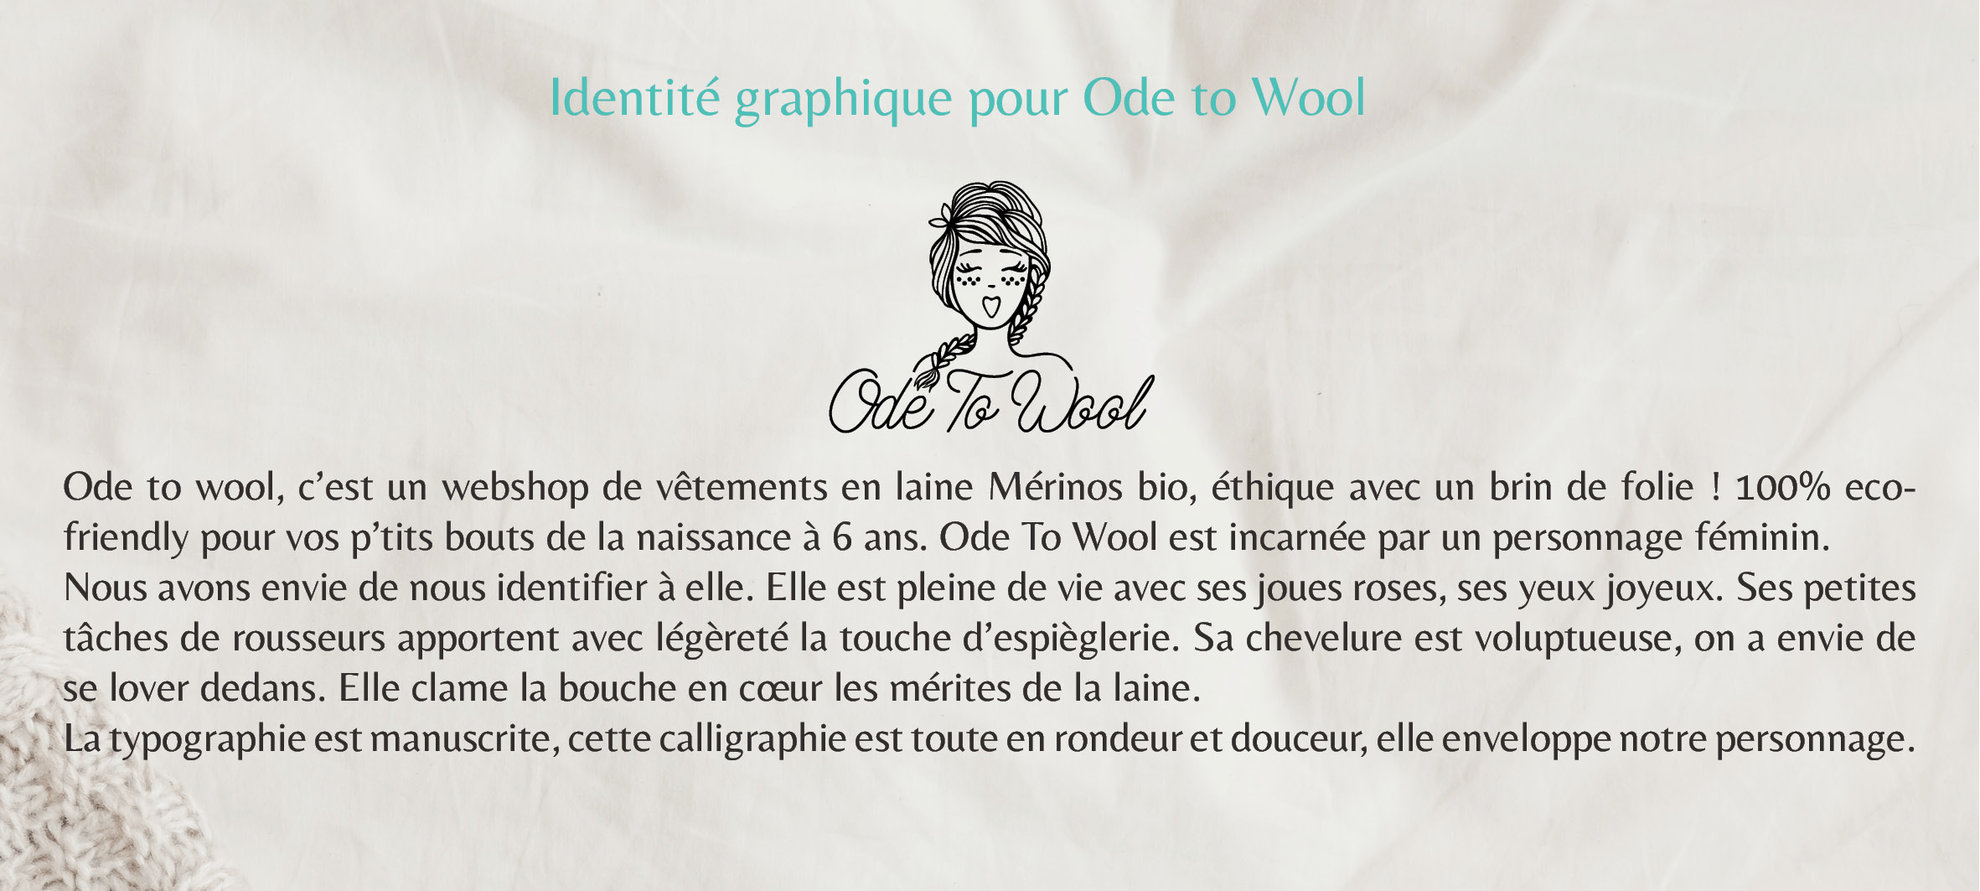 Charte graphique Ode to wool.